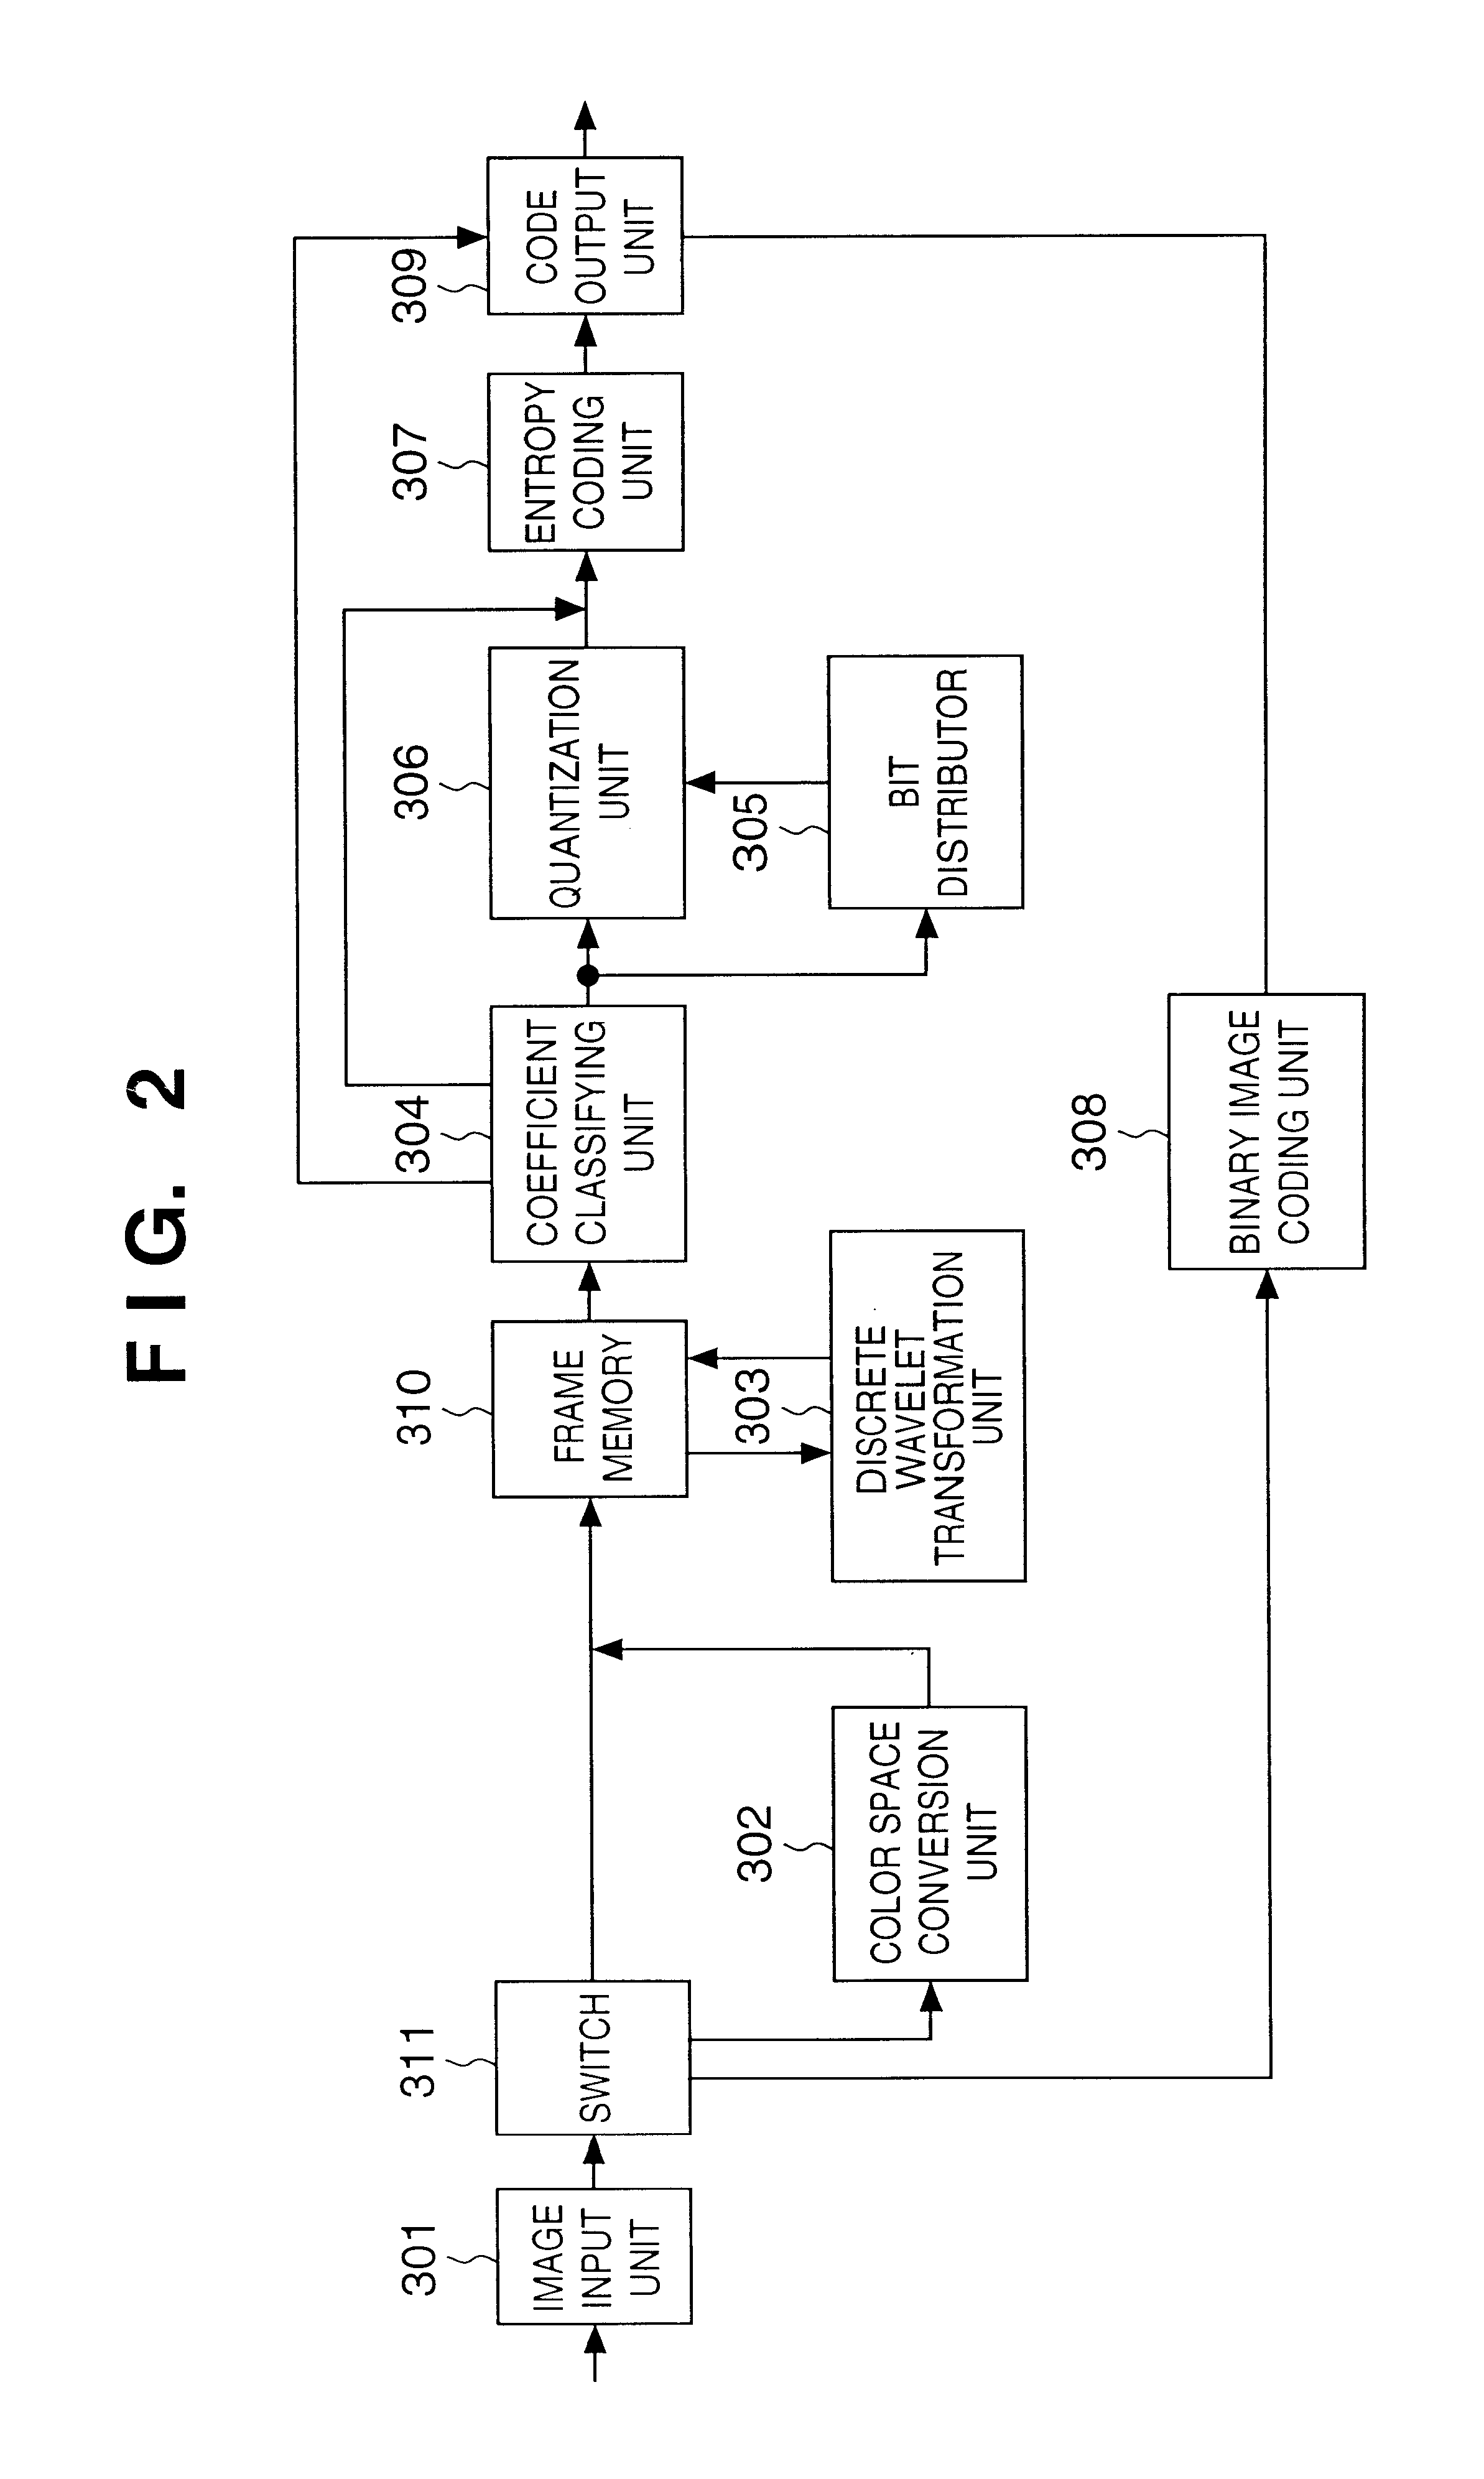 Image sensing apparatus, method and recording medium storing program for method of setting plural photographic modes and variable specific region of image sensing, and providing mode specific compression of image data in the specific region